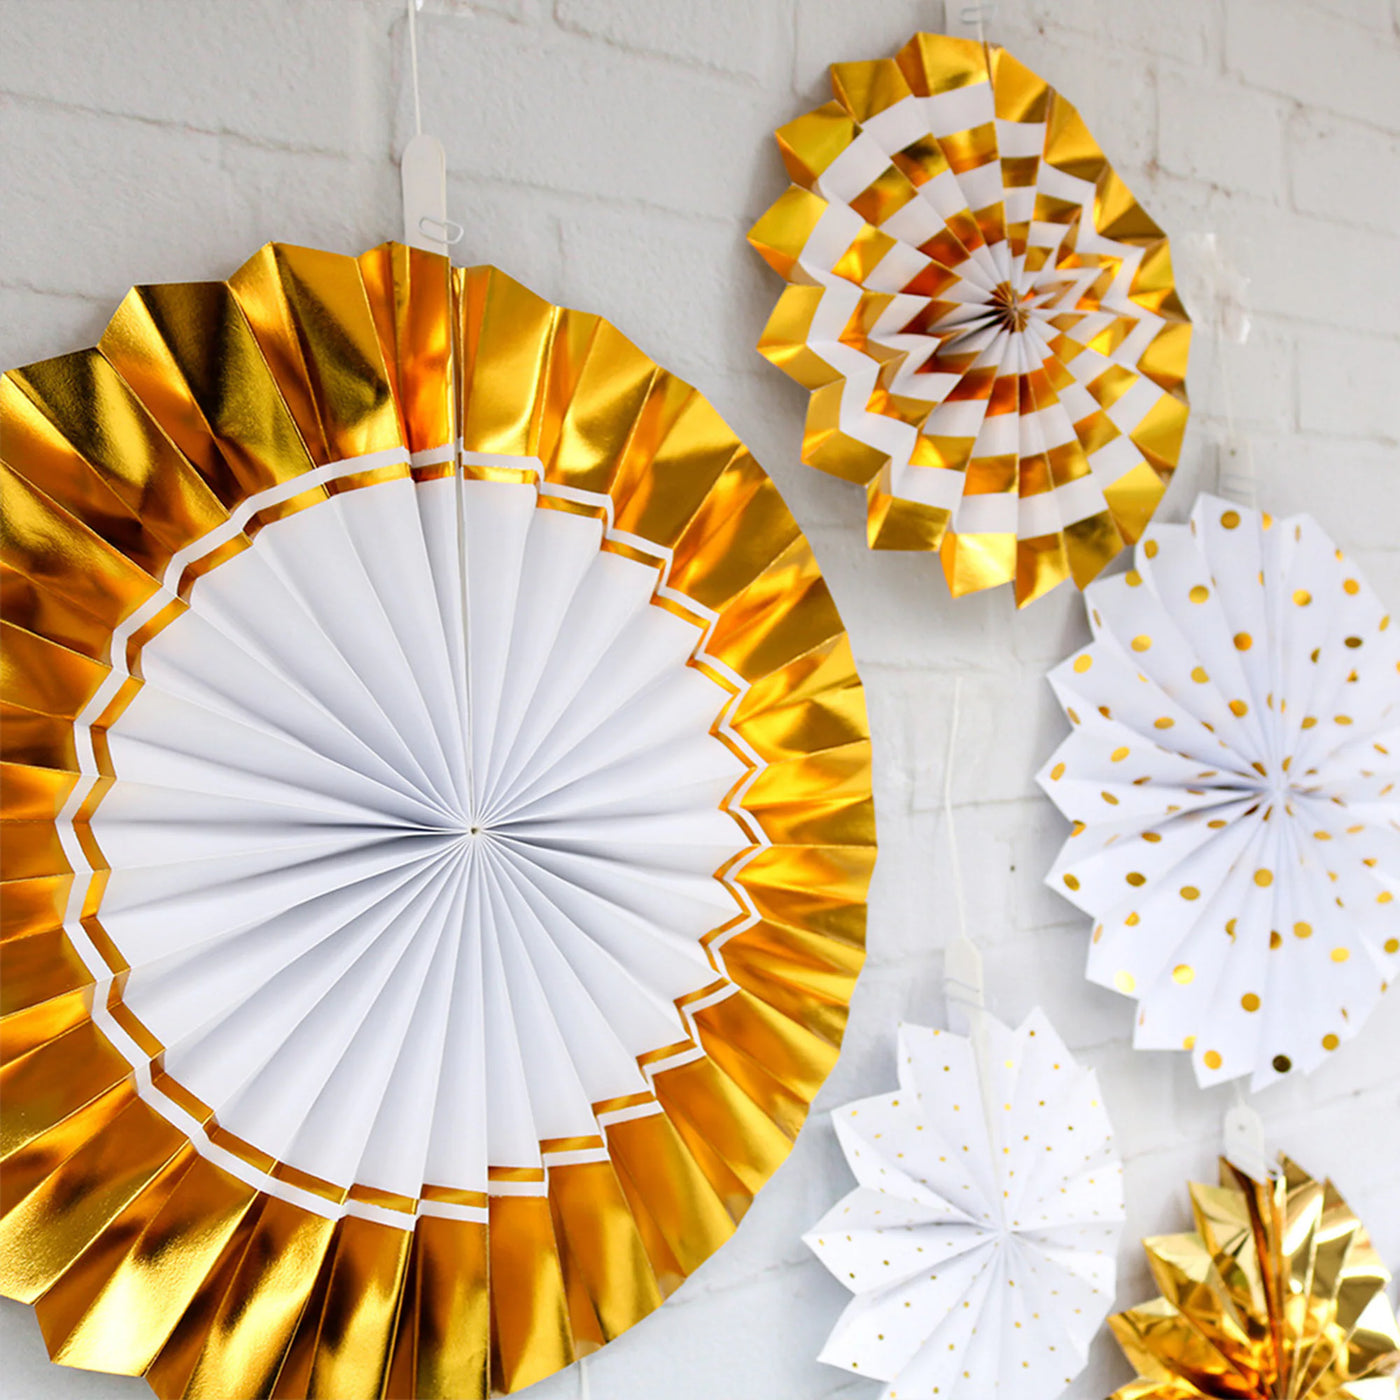 Our 8-piece White and Gold Graduatio Hanging Paper Fan set adds elegance to any event. Featuring classic white and glamorous gold, these fans create a sophisticated ambience. With 8 fans in various sizes, you can customize your decor effortlessly. Perfect for weddings, birthdays, or any special occasion, these reusable fans are easy to assemble and eco-friendly. Elevate your decor today!